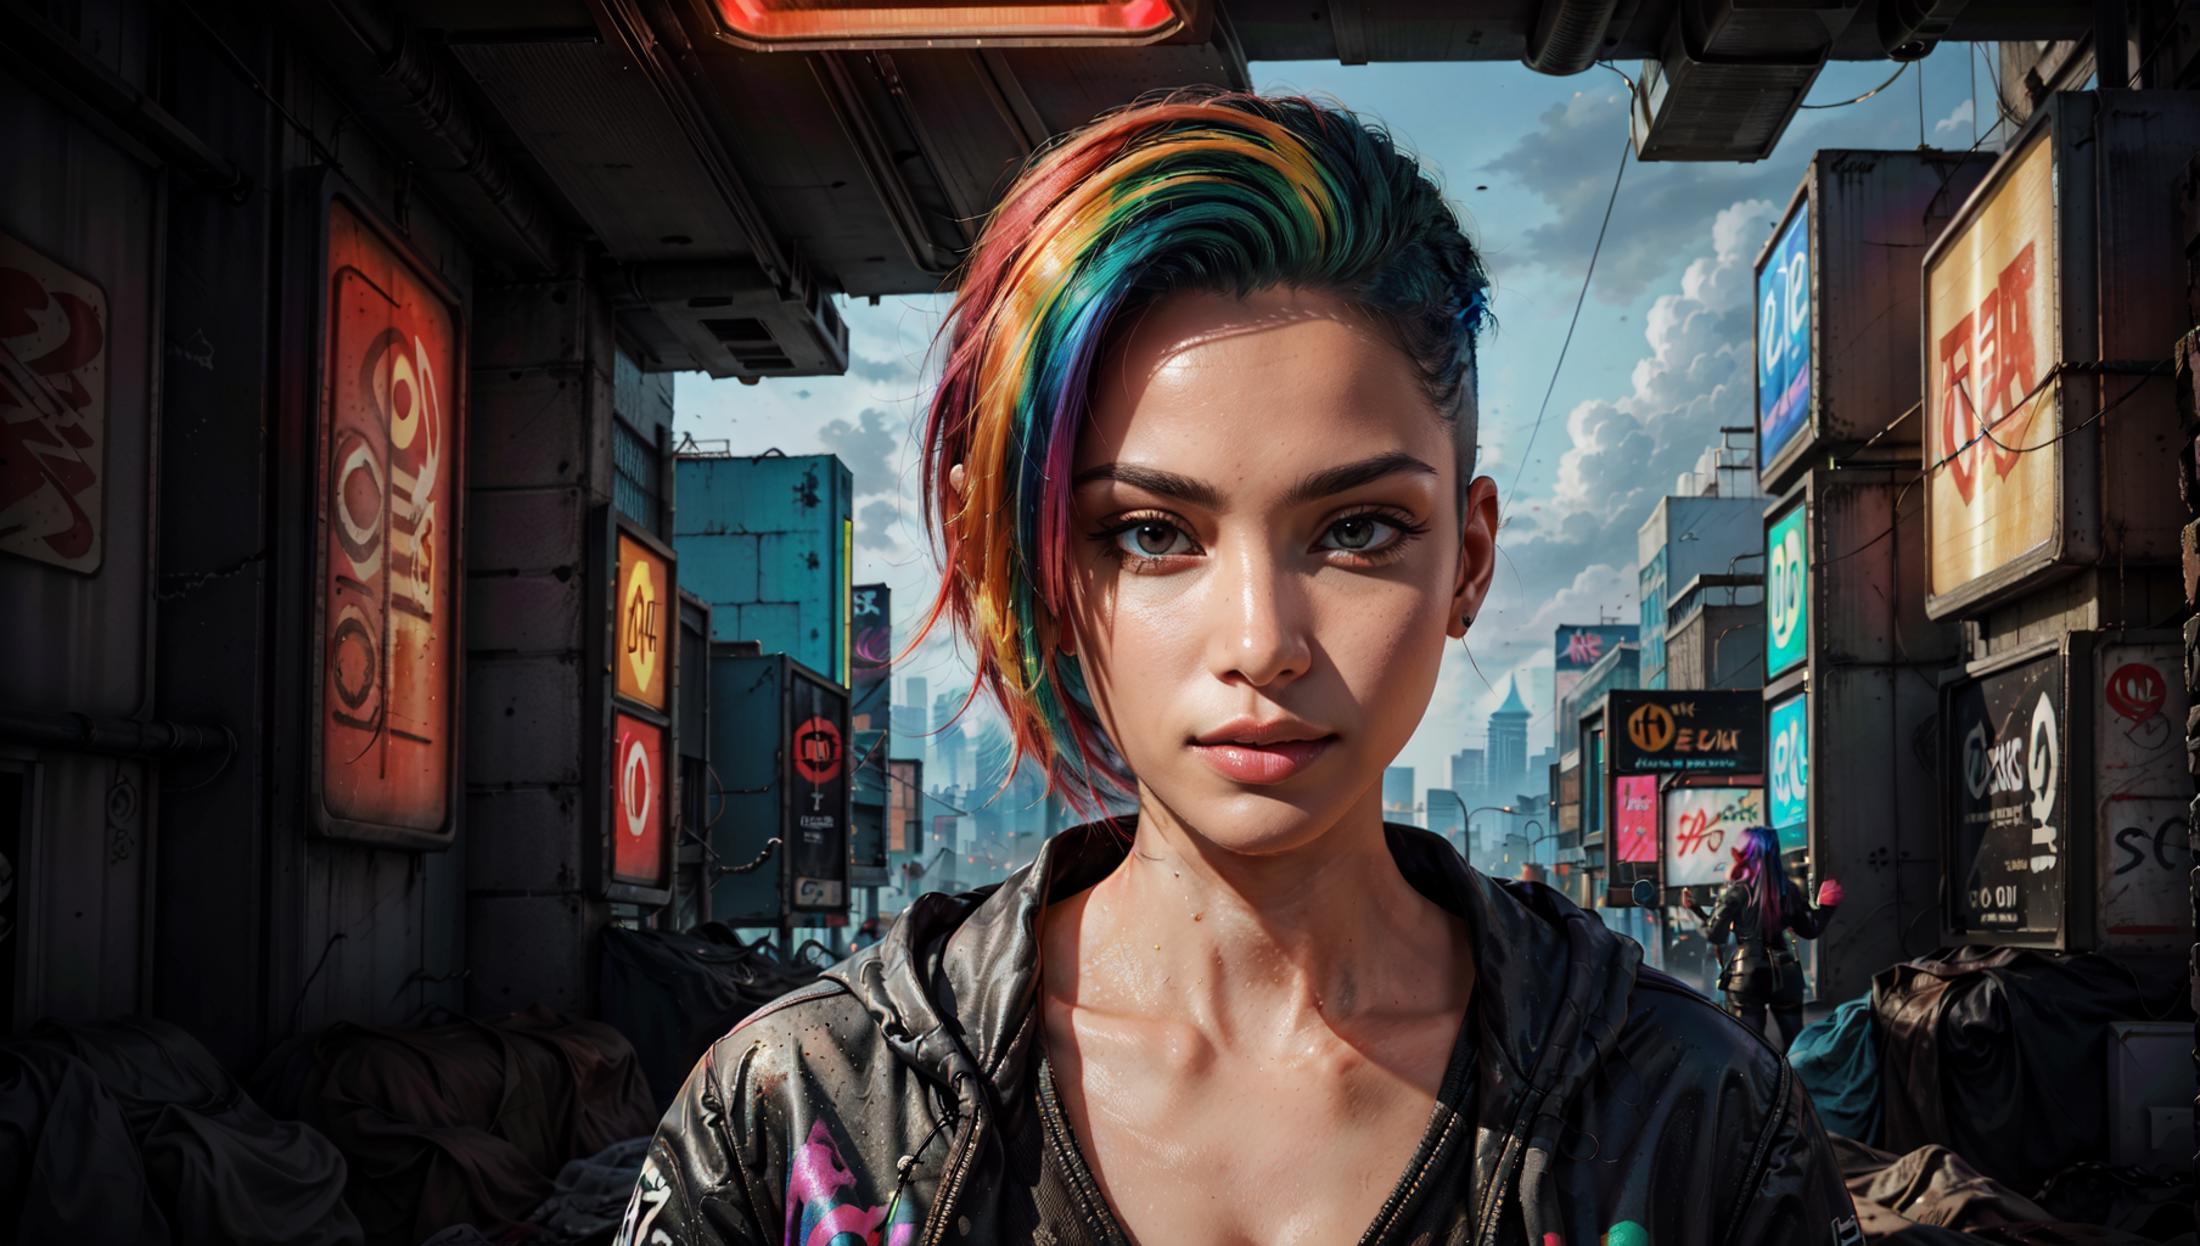 A colorful, artistic image of a woman with a rainbow-colored hair.